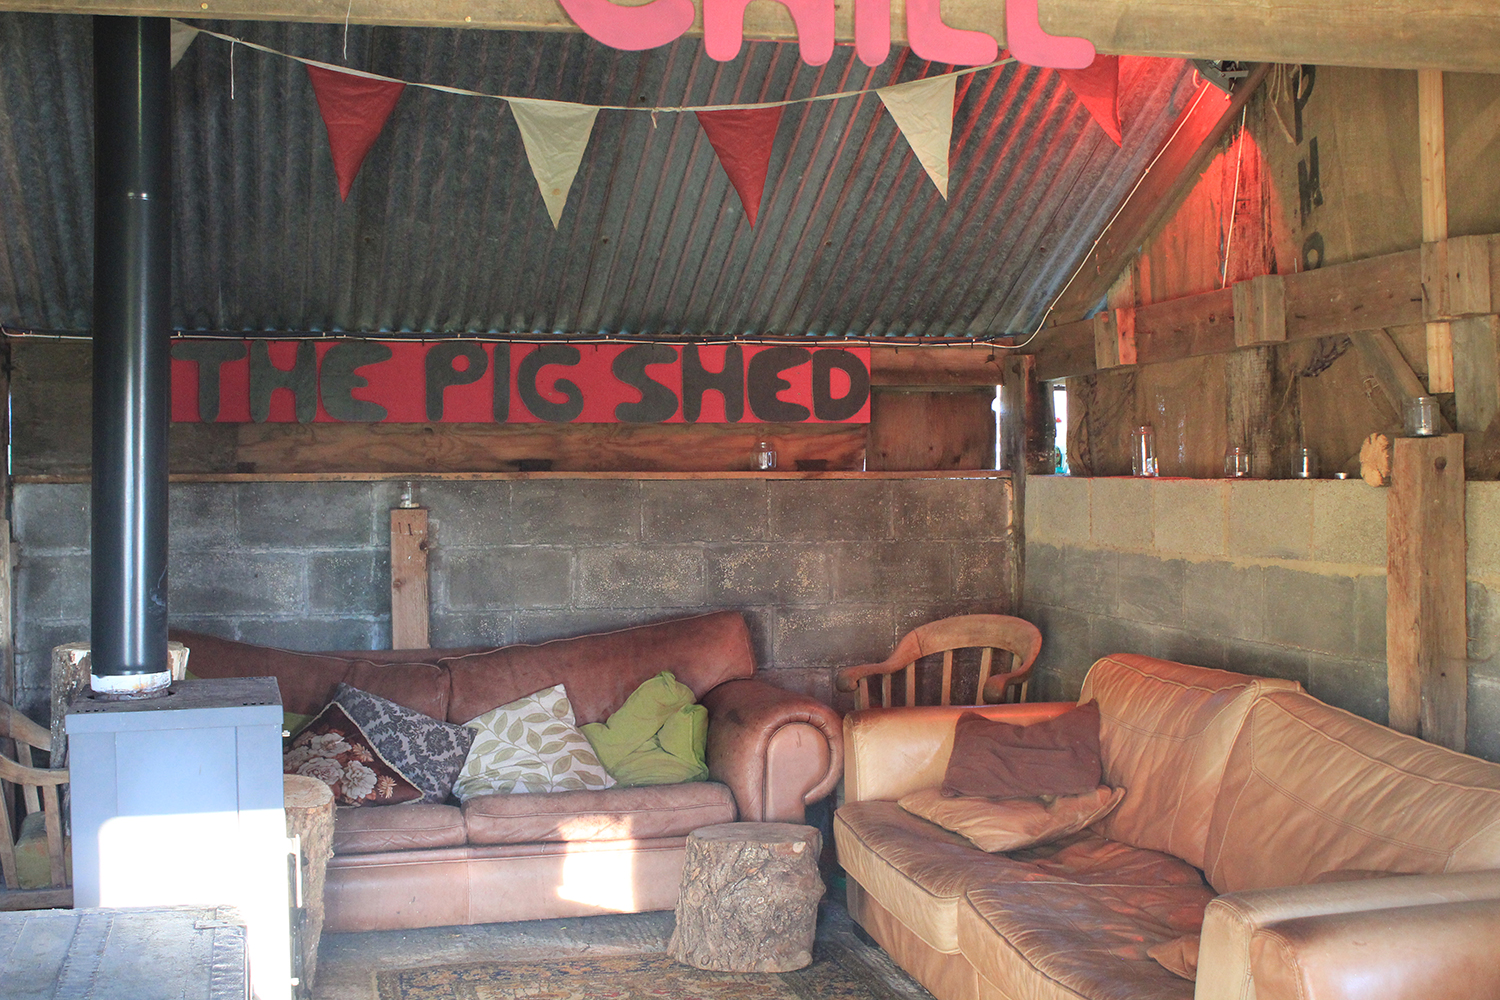 Inside the Pig Shed at Thorpe Glamping